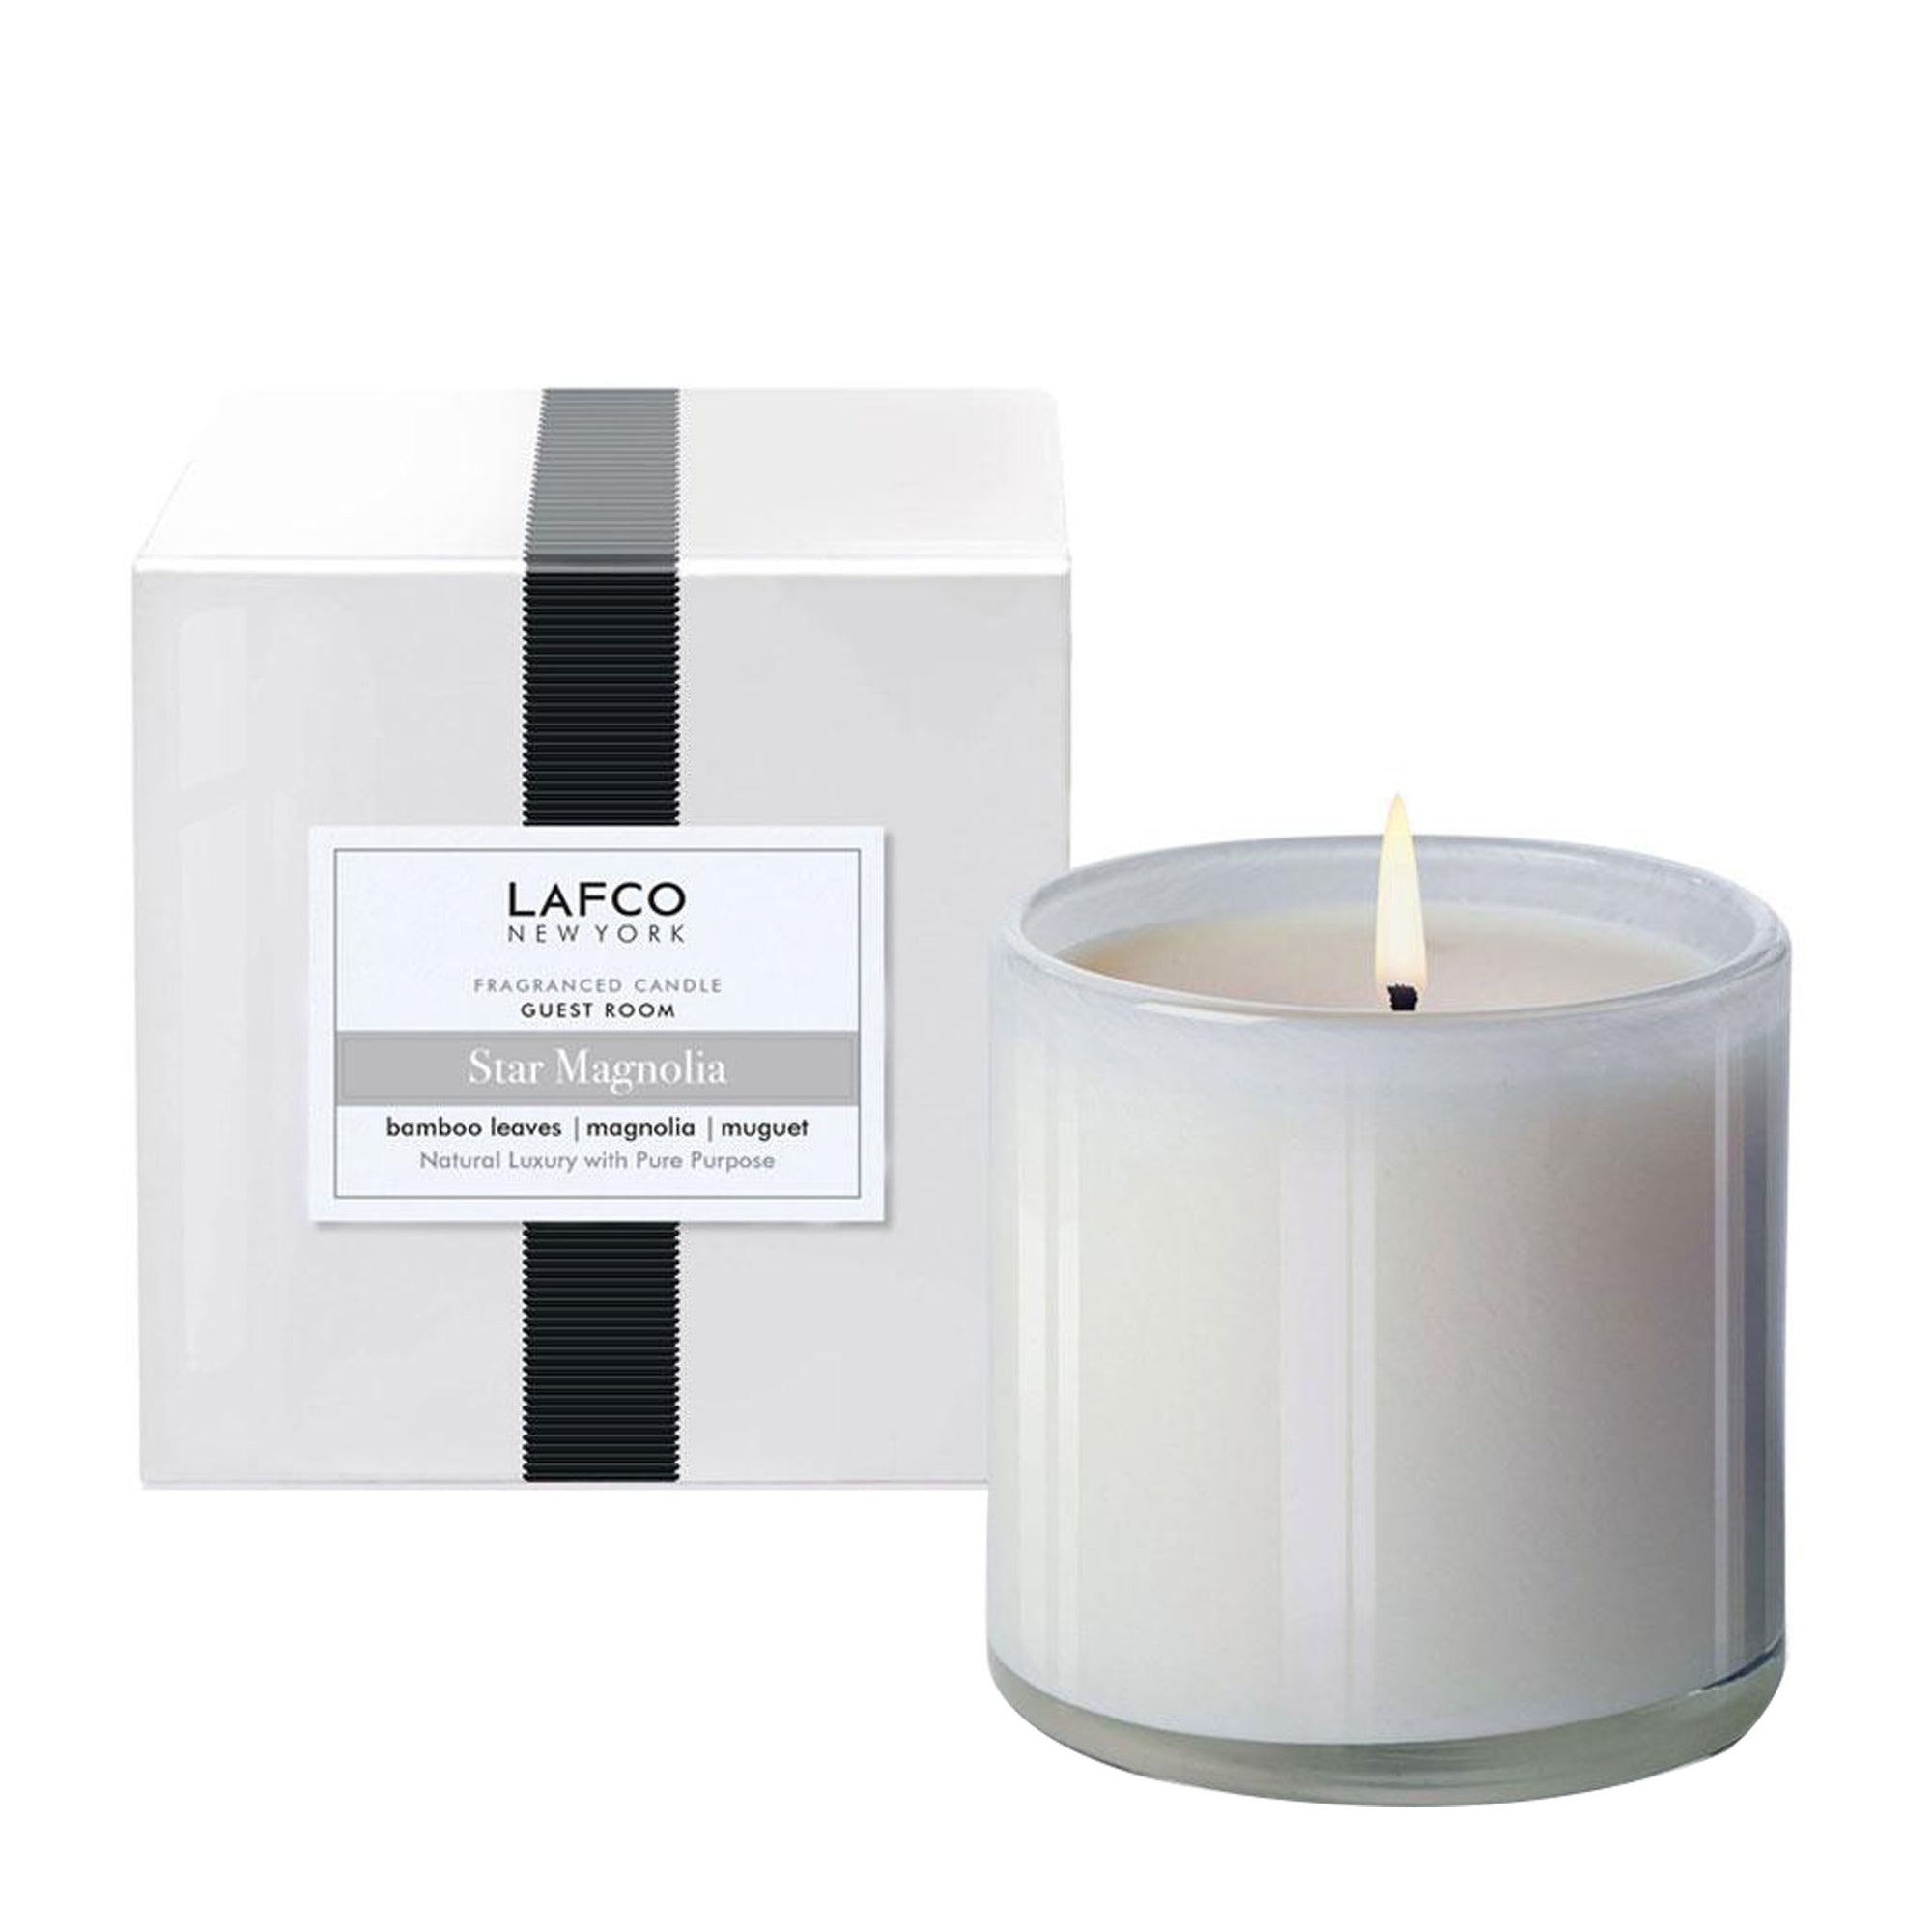 Lafco Guest Room | Star Magnolia Candle